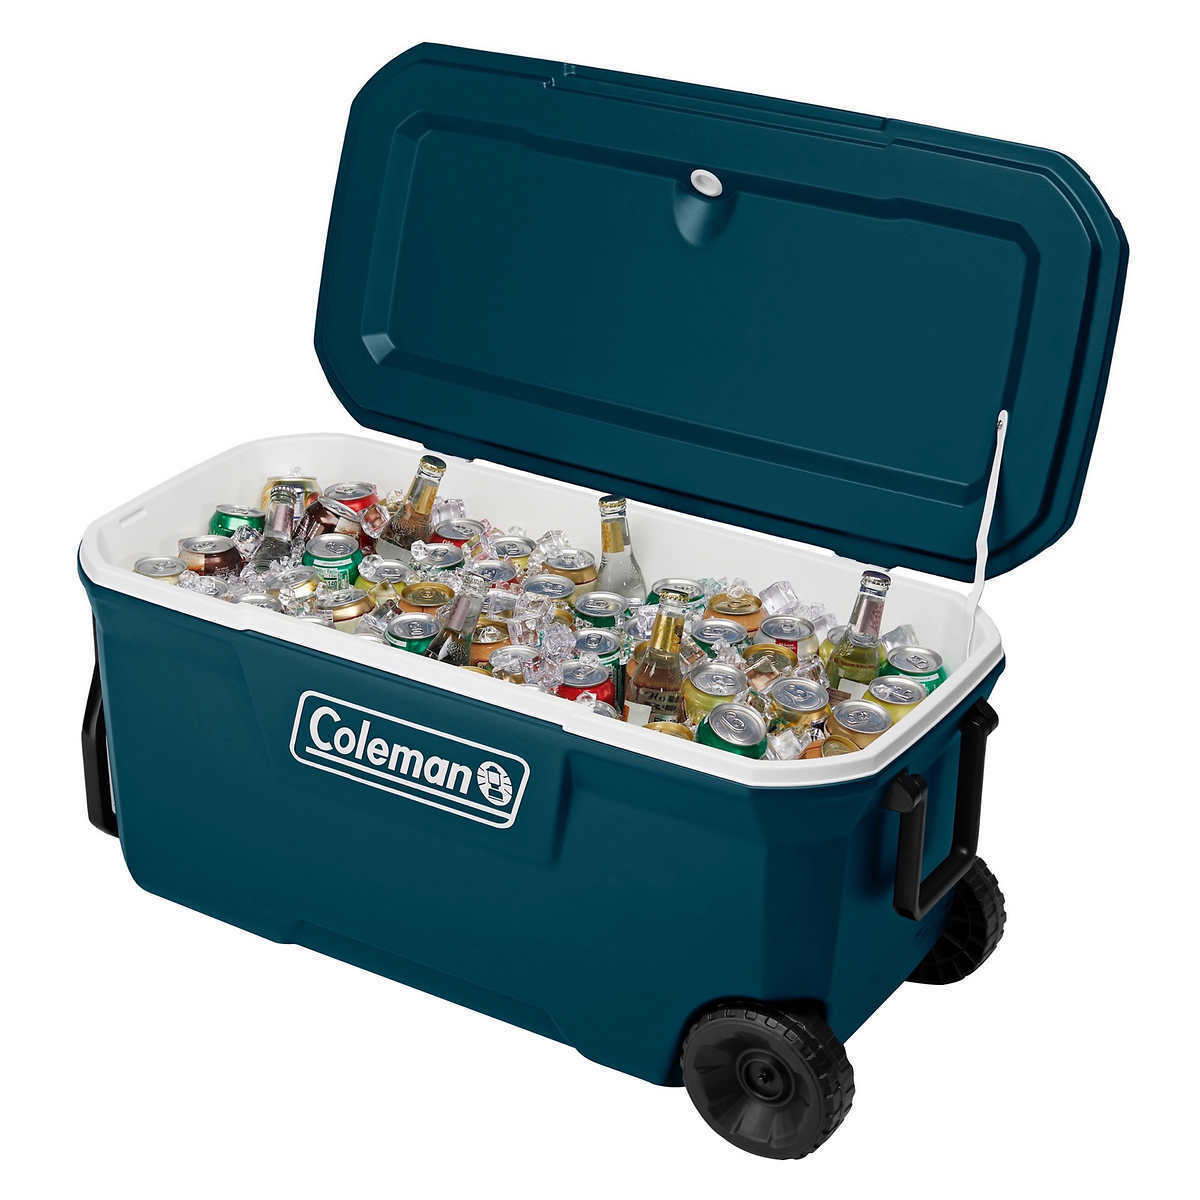 Wheeled Hard Cooler Fully Insulated 100 メーカー再生品 Lid Tailgating リアル Camping Q